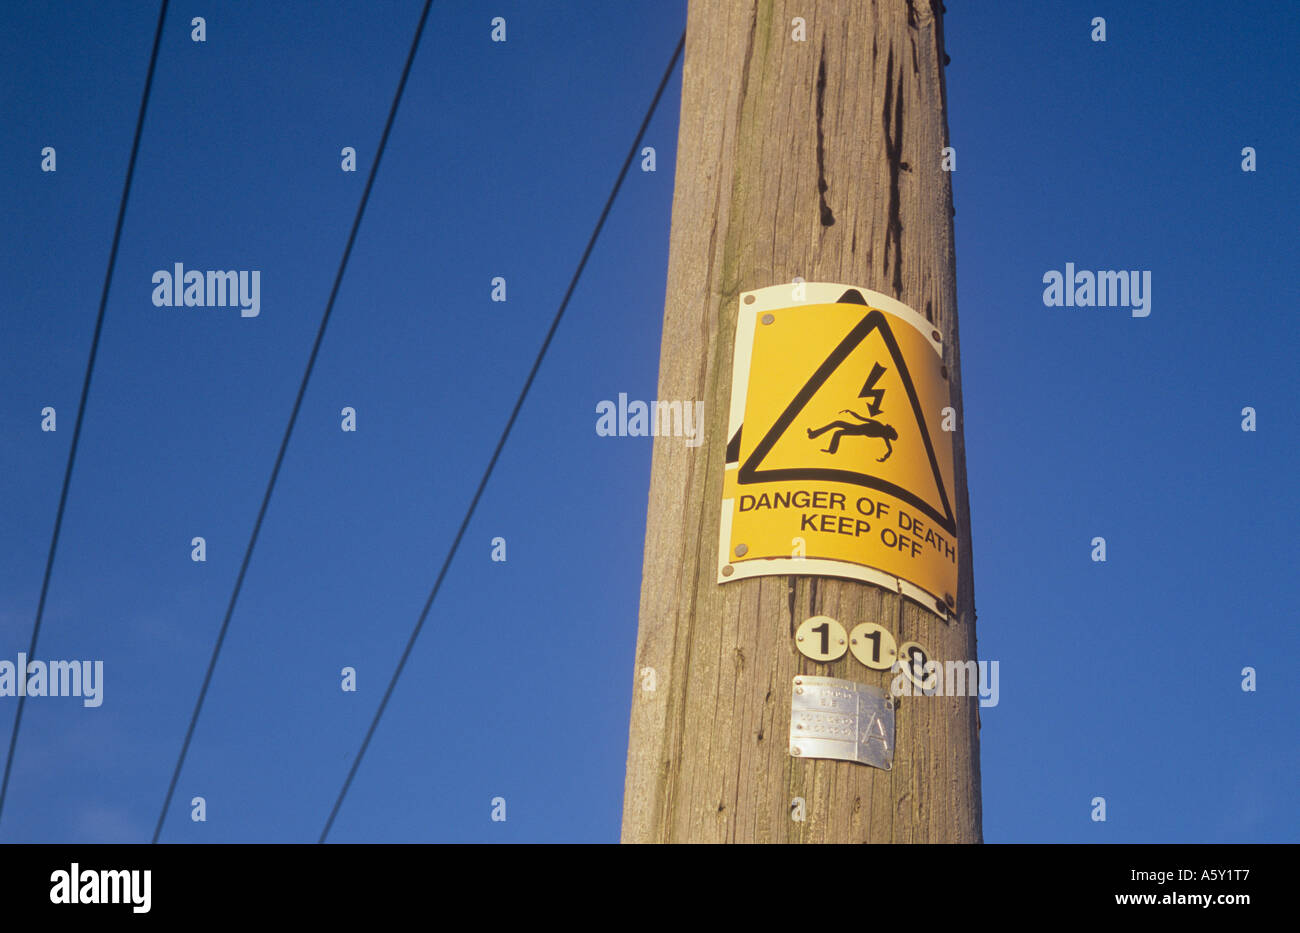 Yellow sign with iconic man being electrocuted and words Danger of death Keep off nailed over older sign on electricity pole Stock Photo